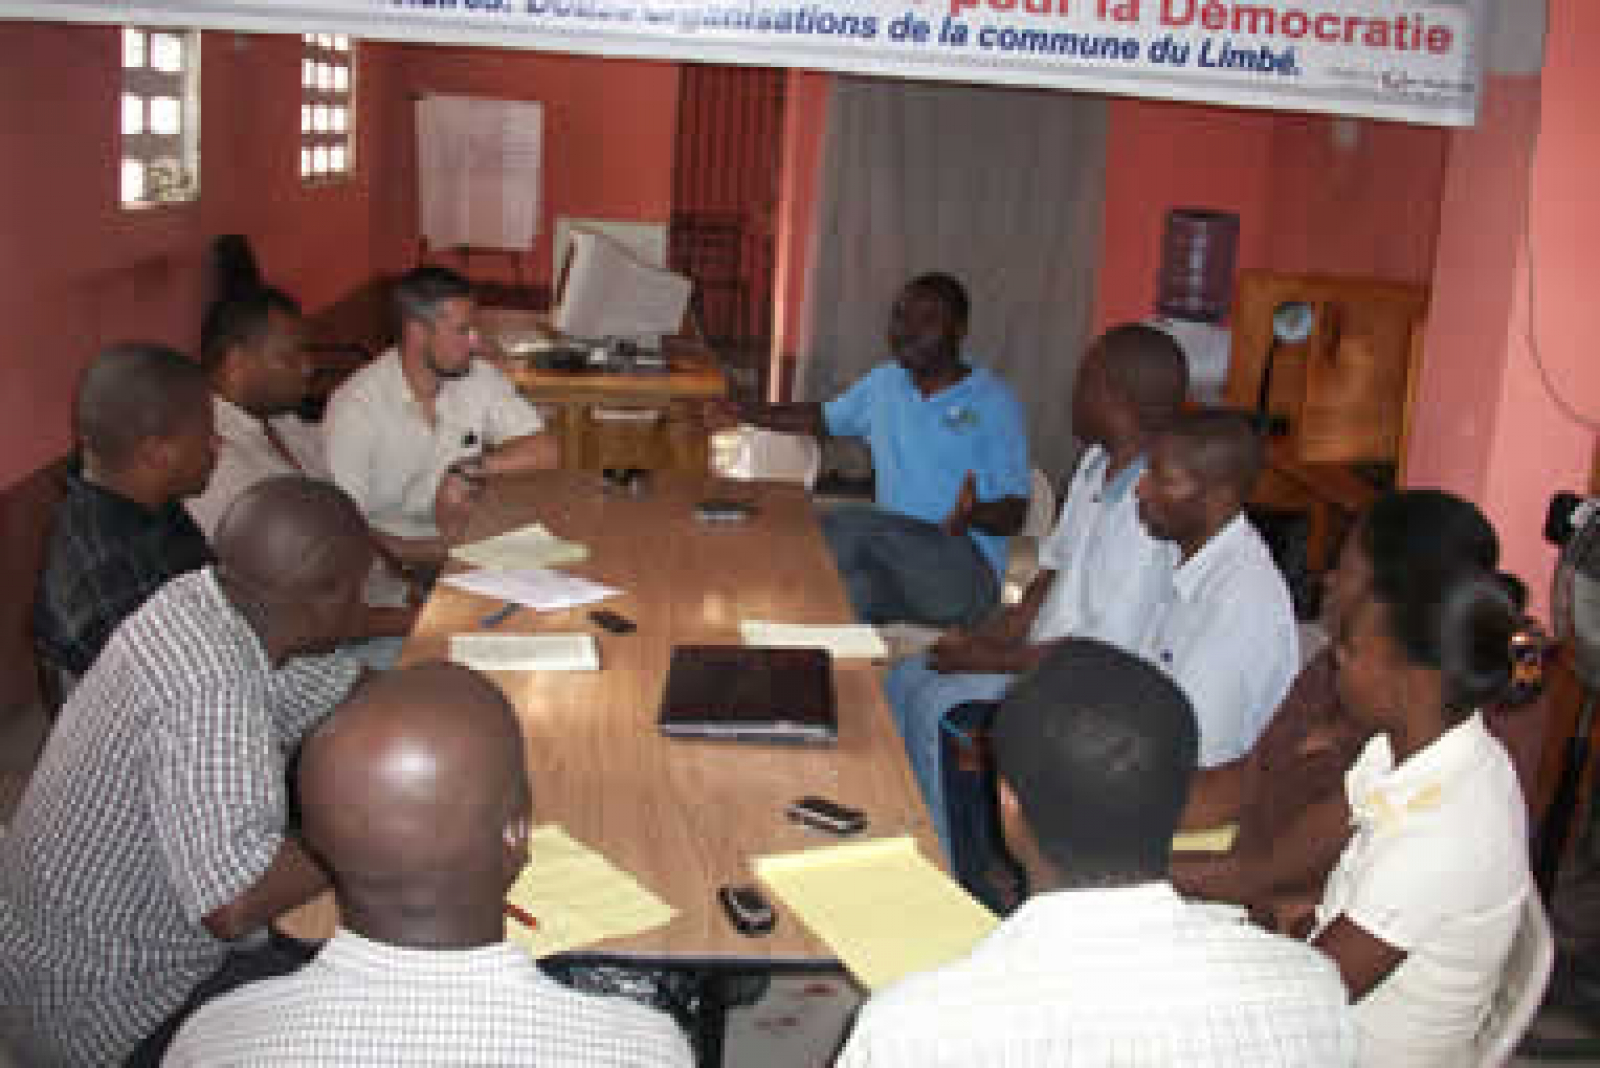 Initiative Committees Working to Distribute Aid and Information in Haiti